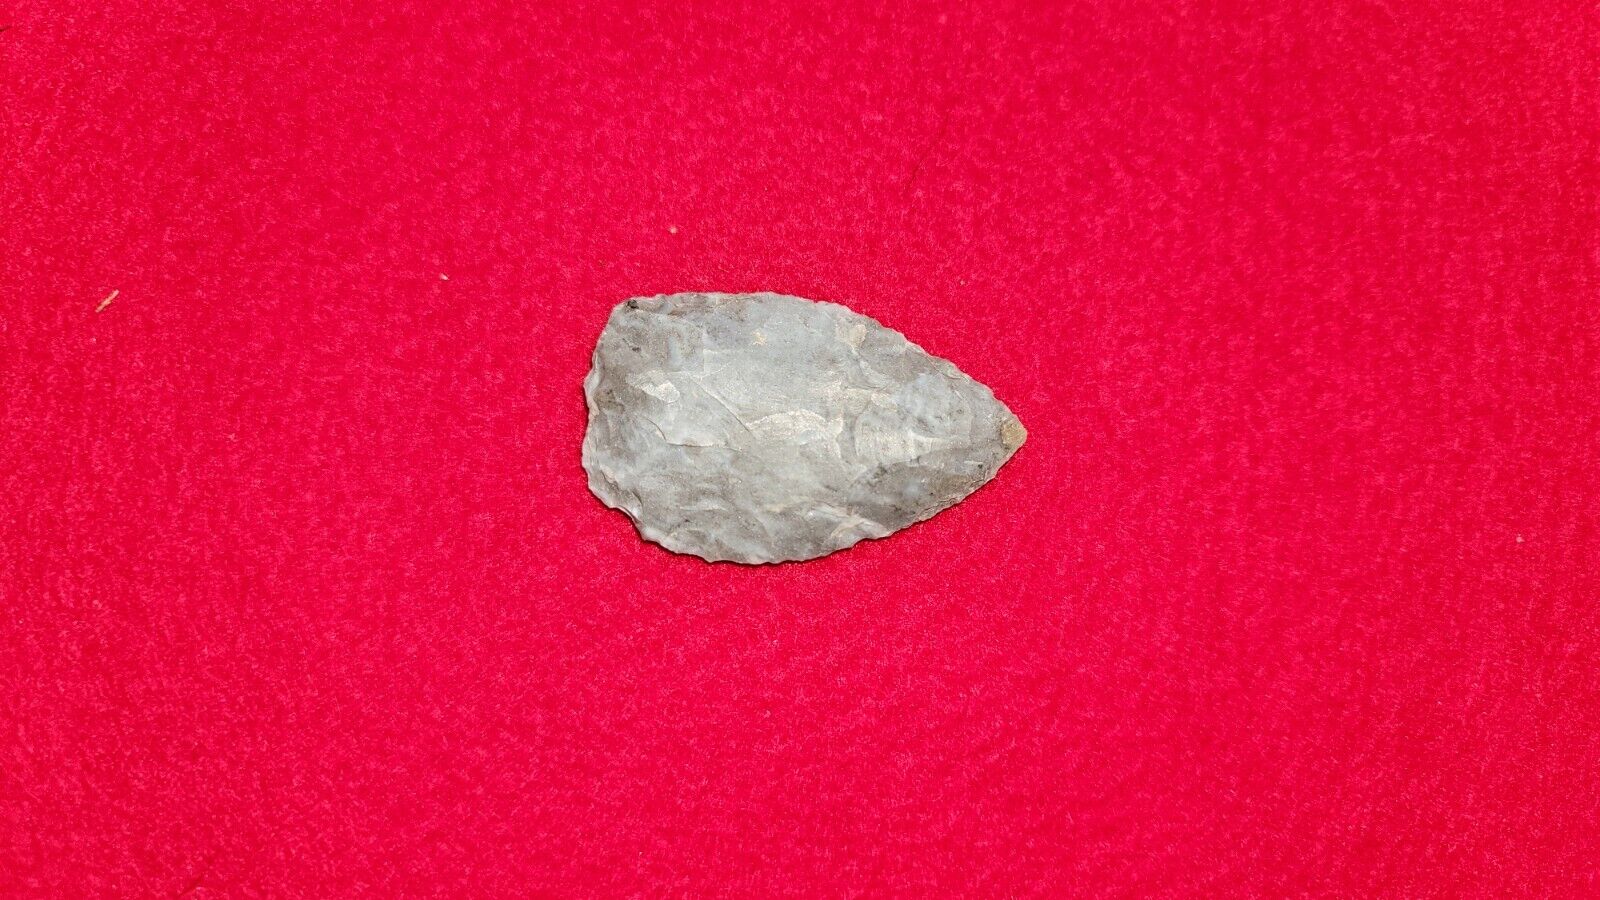 Authentic Native American Indian Arrowhead Artifact Found In Tennessee